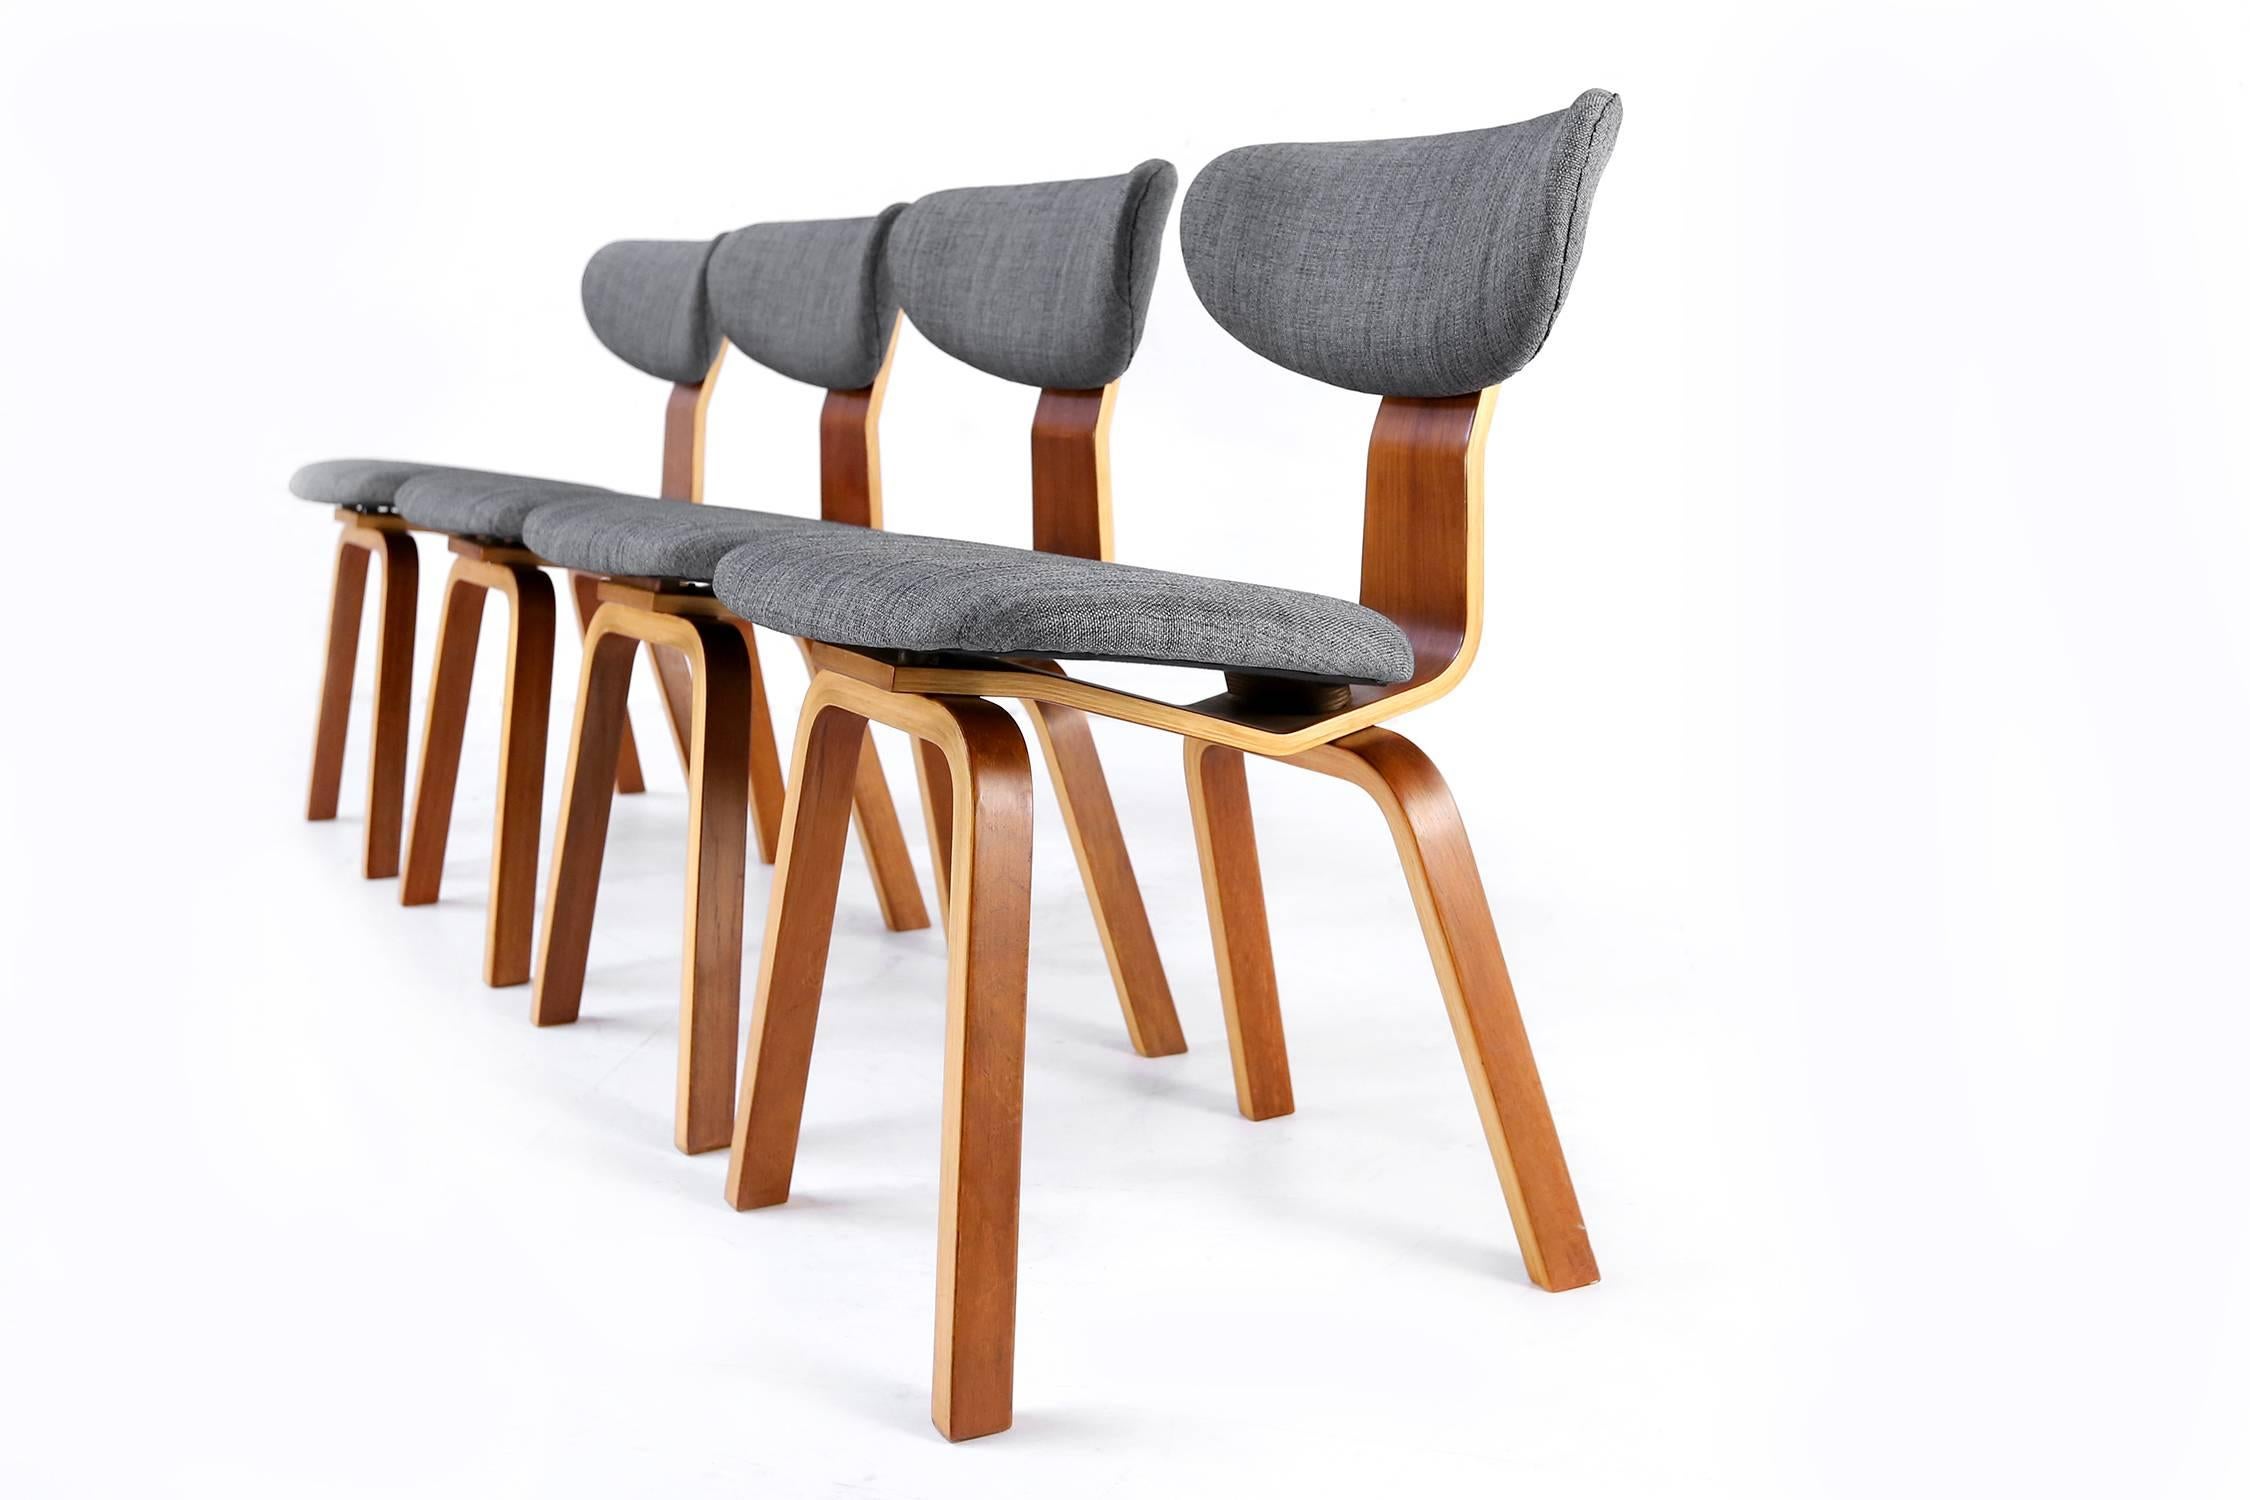 A set of very beautiful and uncommon SB 37 chairs designed by the renowned Dutch designer Cees Braakman, for UMS Pastoe, The Netherlands. These Dutch modern dining chairs are very hard to find, especially as a complete set. 
After World war II